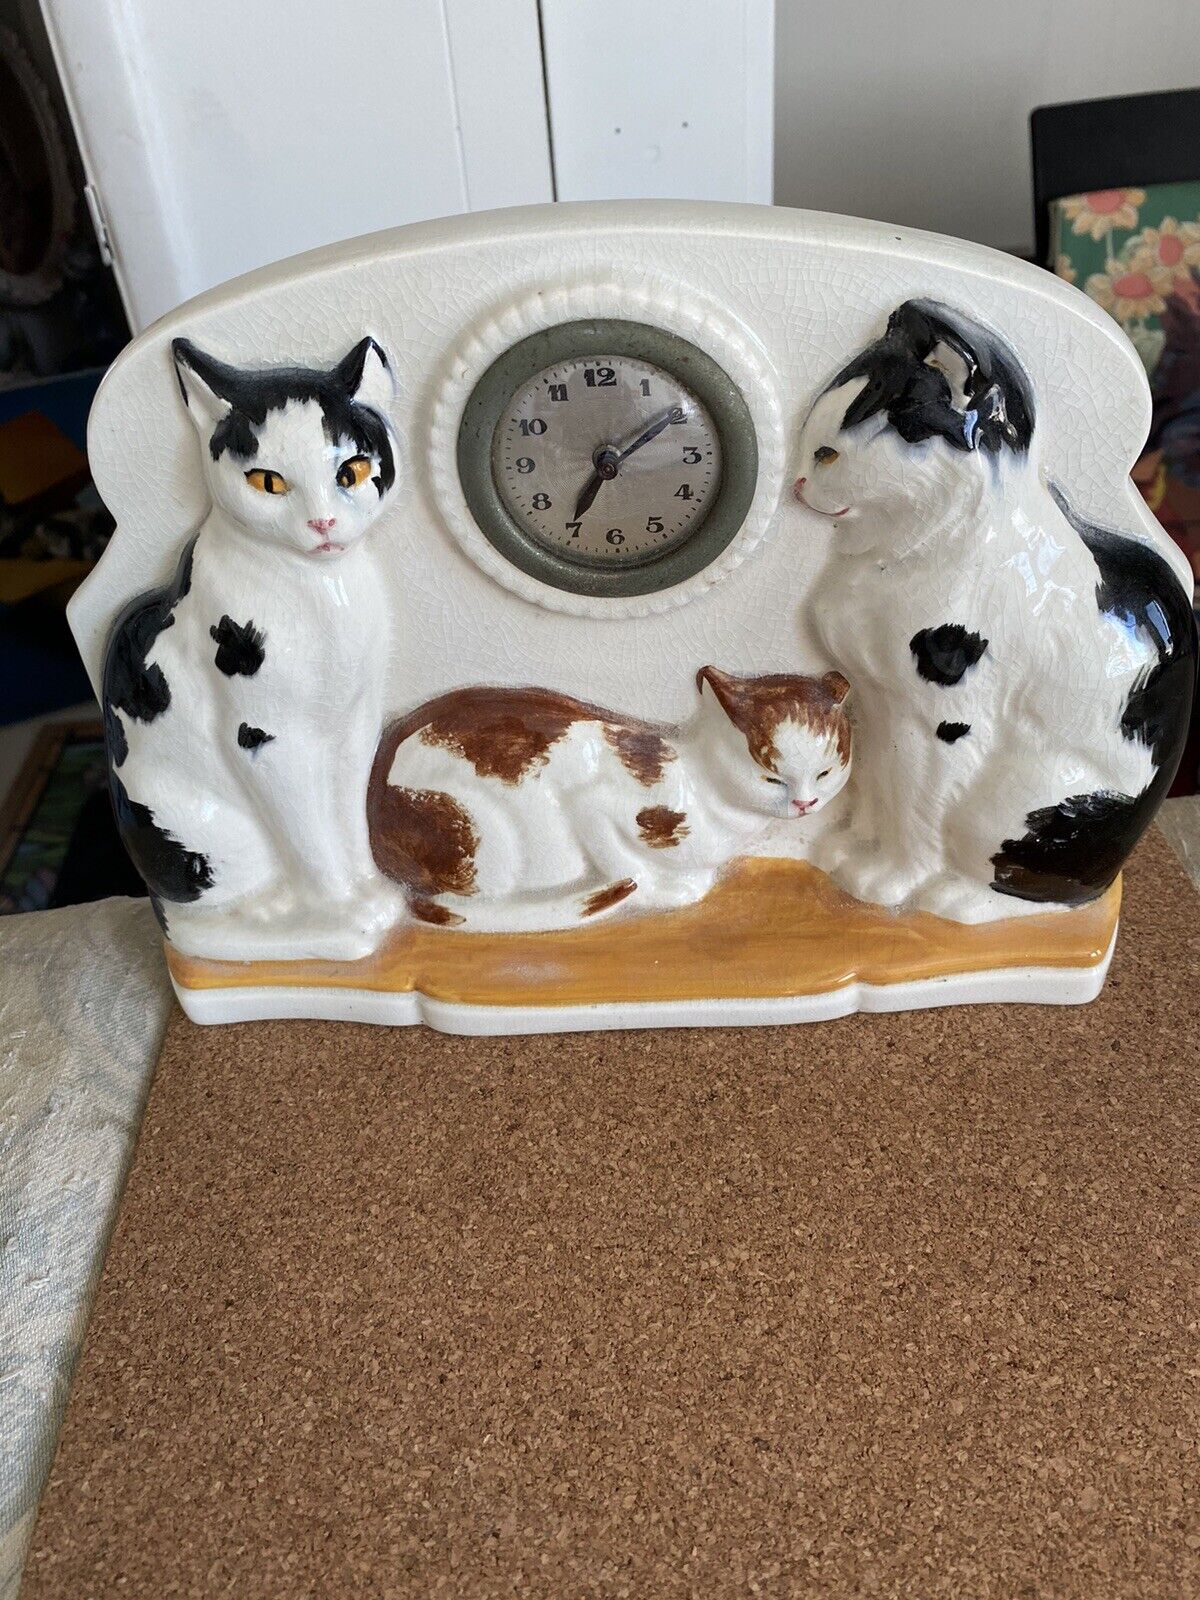 ANTIQUE 1920s MANTLE CLOCK From FRANCE with ~~3 SITTING CATS~~RARE~~